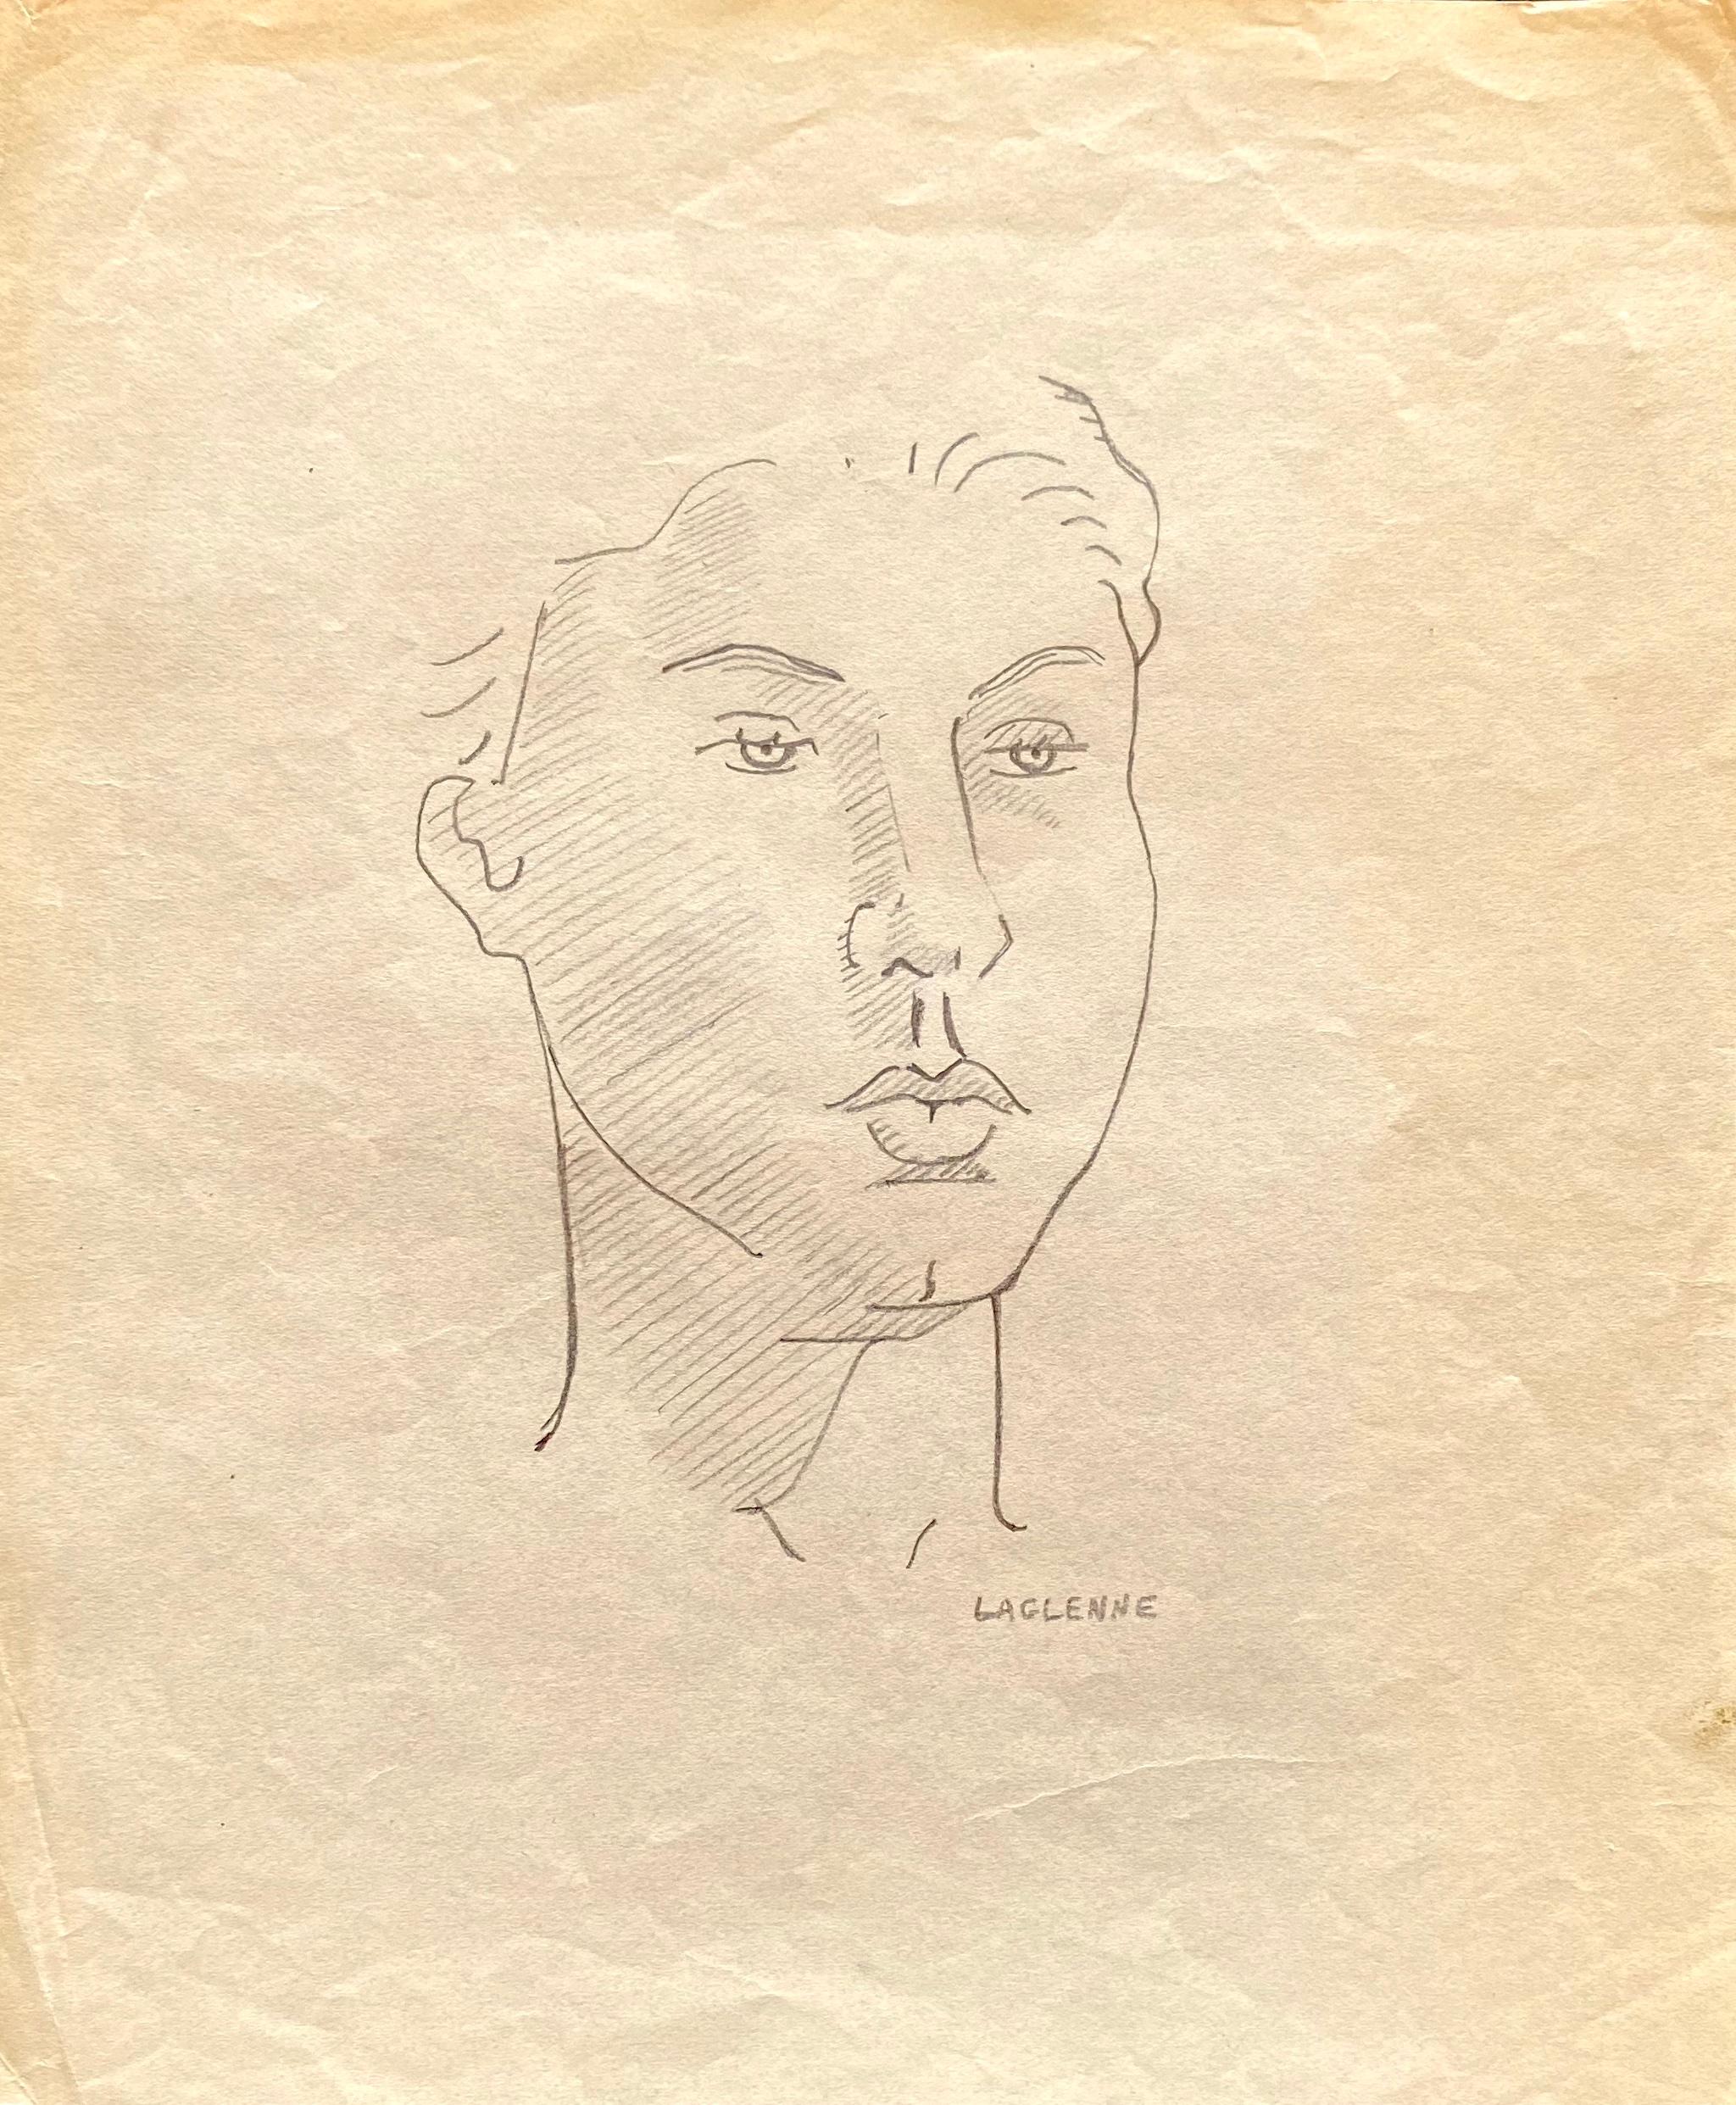 Portrait is an original drawing in pencil realized by Jean-Francis Laglenne.

This Artwork is depicted through strong and confident strokes in a well-balanced composition.

Hand-signed.

In good conditions except for being aged.